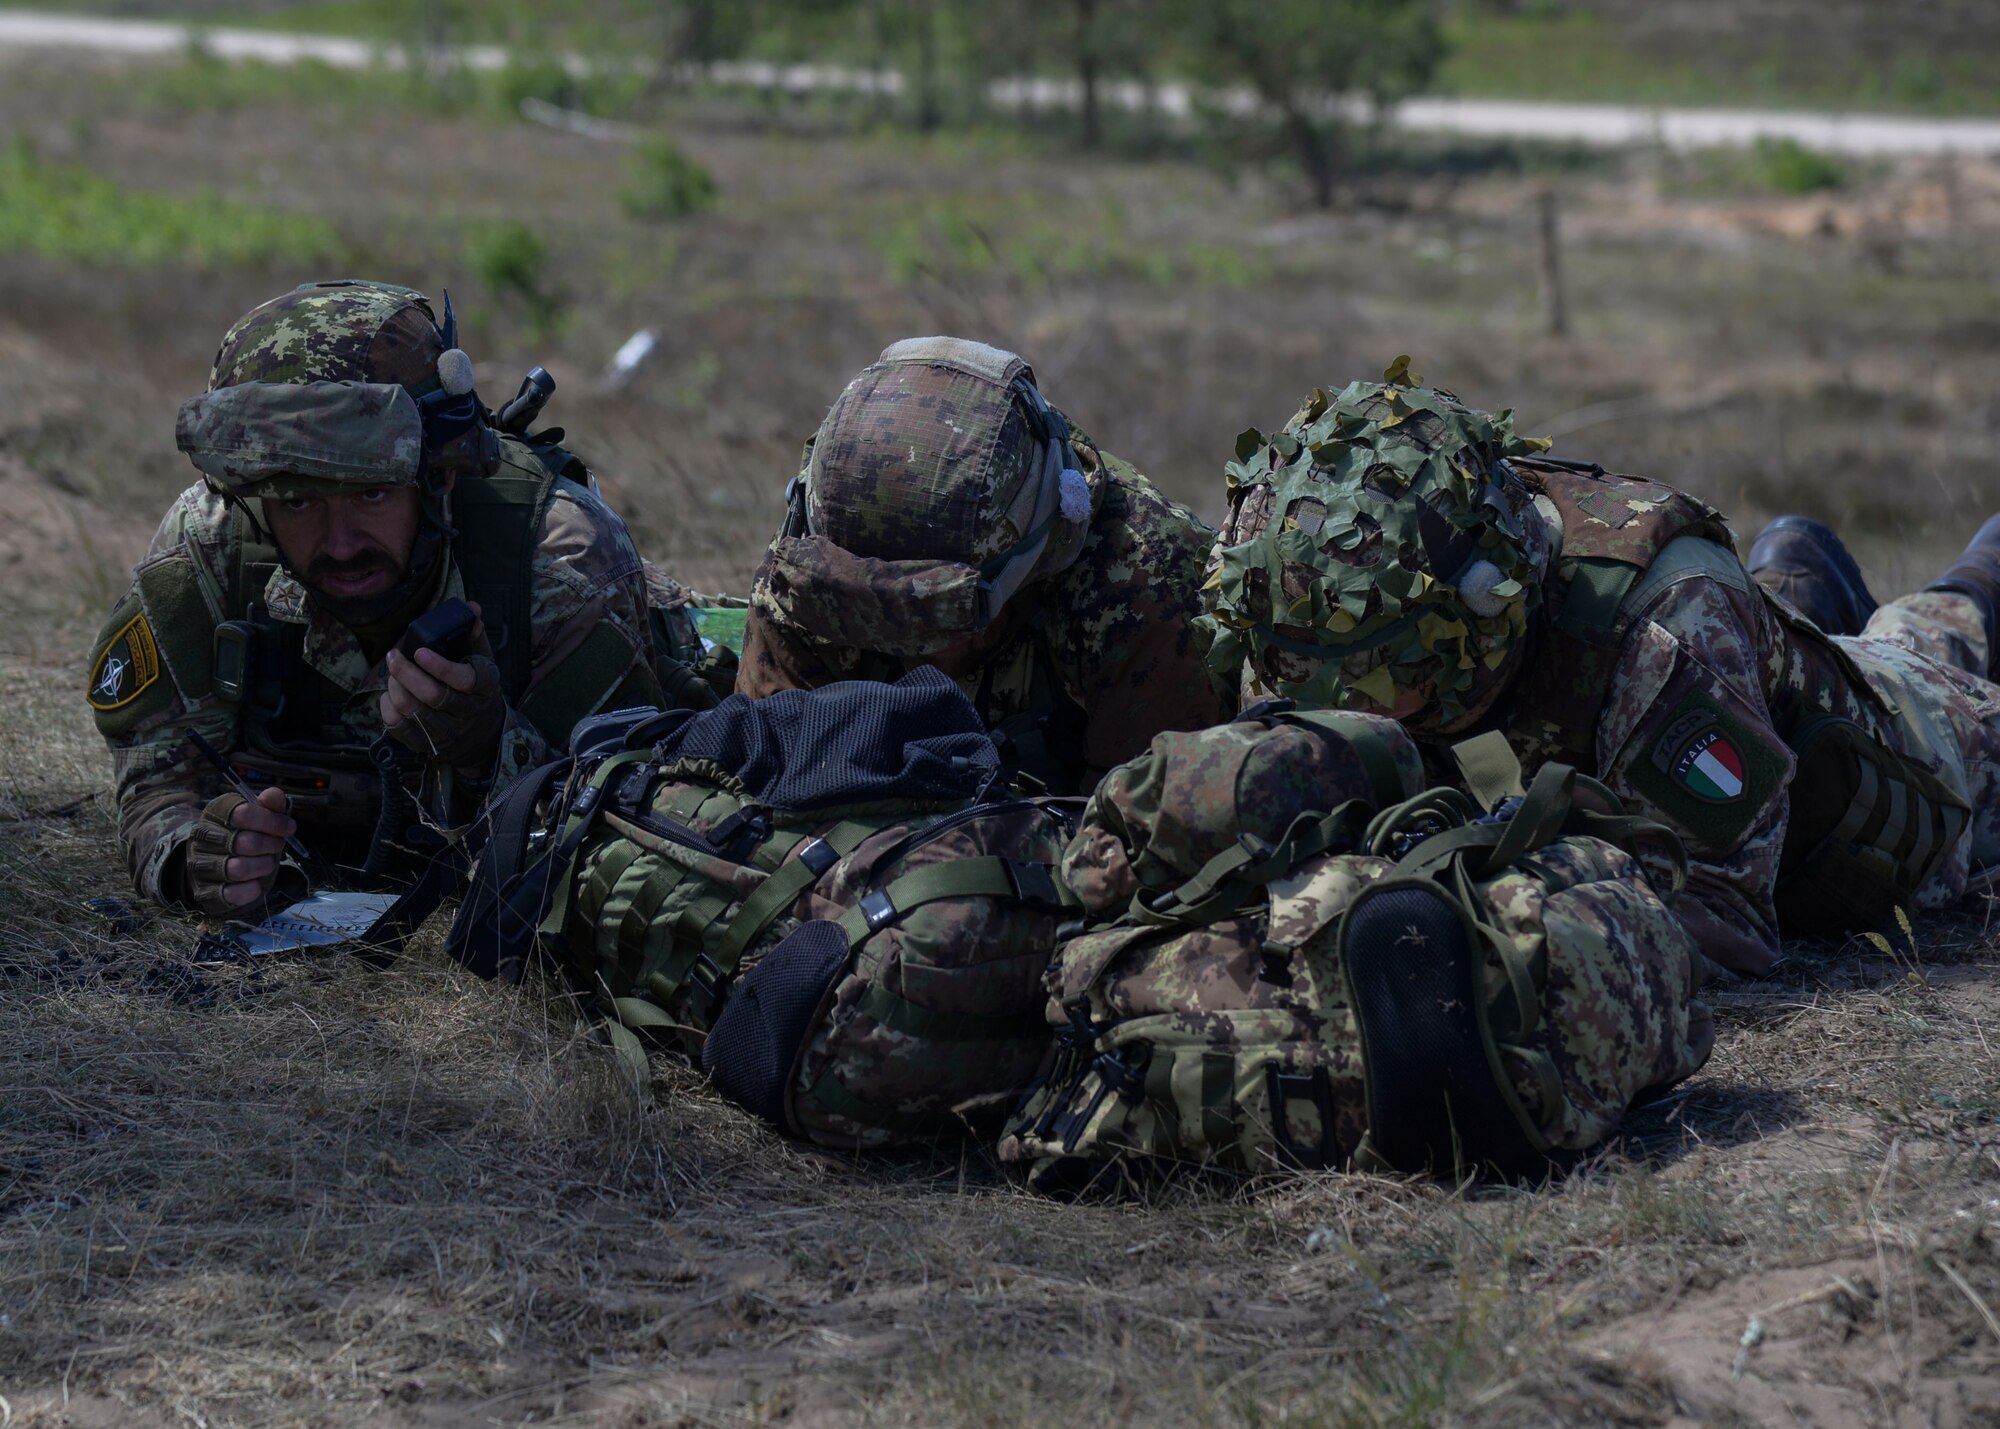 Italian Joint Terminal Attack Controllers call in close air support during Saber Strike 18 in Adazi, Latvia, June 5, 2018. Countries participating in Saber Strike had the opportunity to practice combining the air and land components of warfighting to strengthen partnership capabilities. (U.S. Air Force photo by Staff Sgt. Jimmie D. Pike)